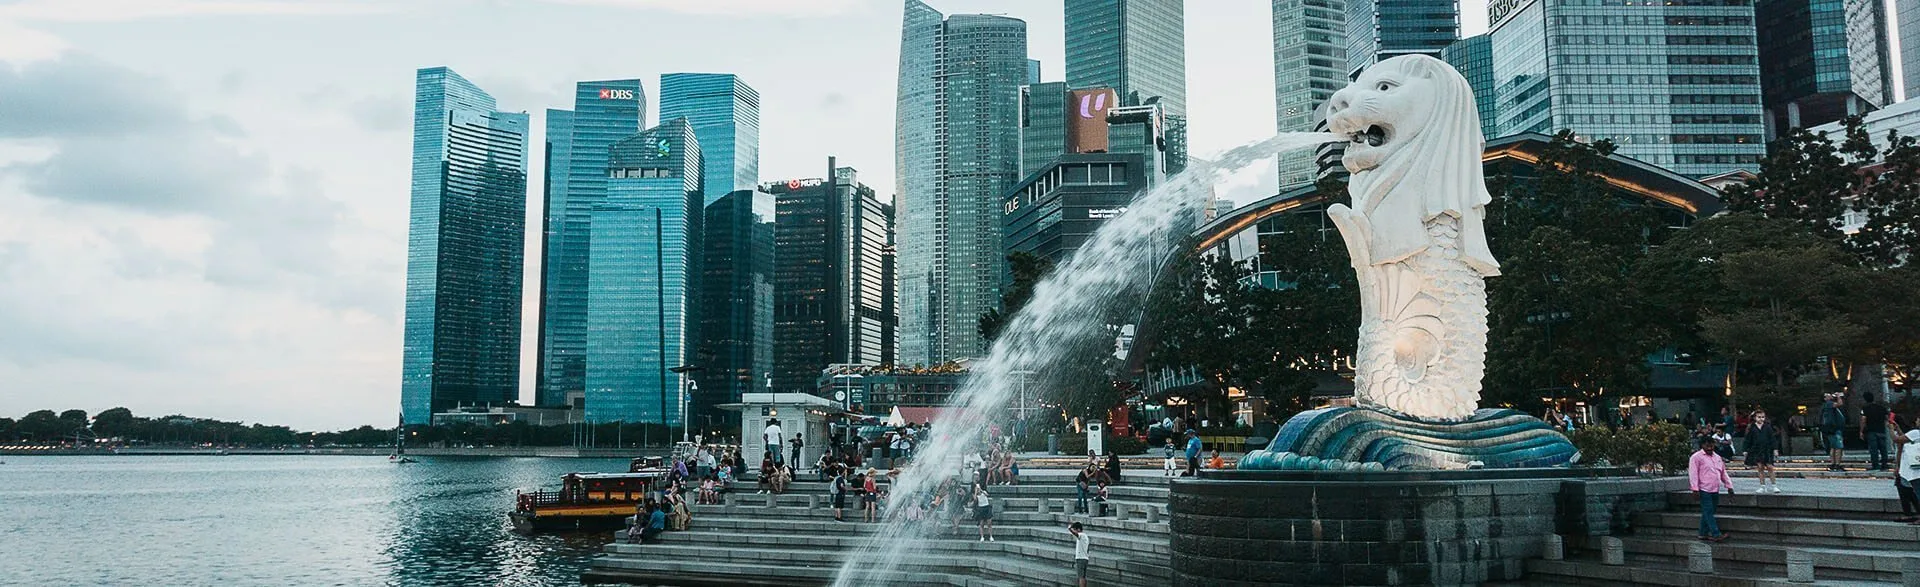 Merlion fountain in Singapore